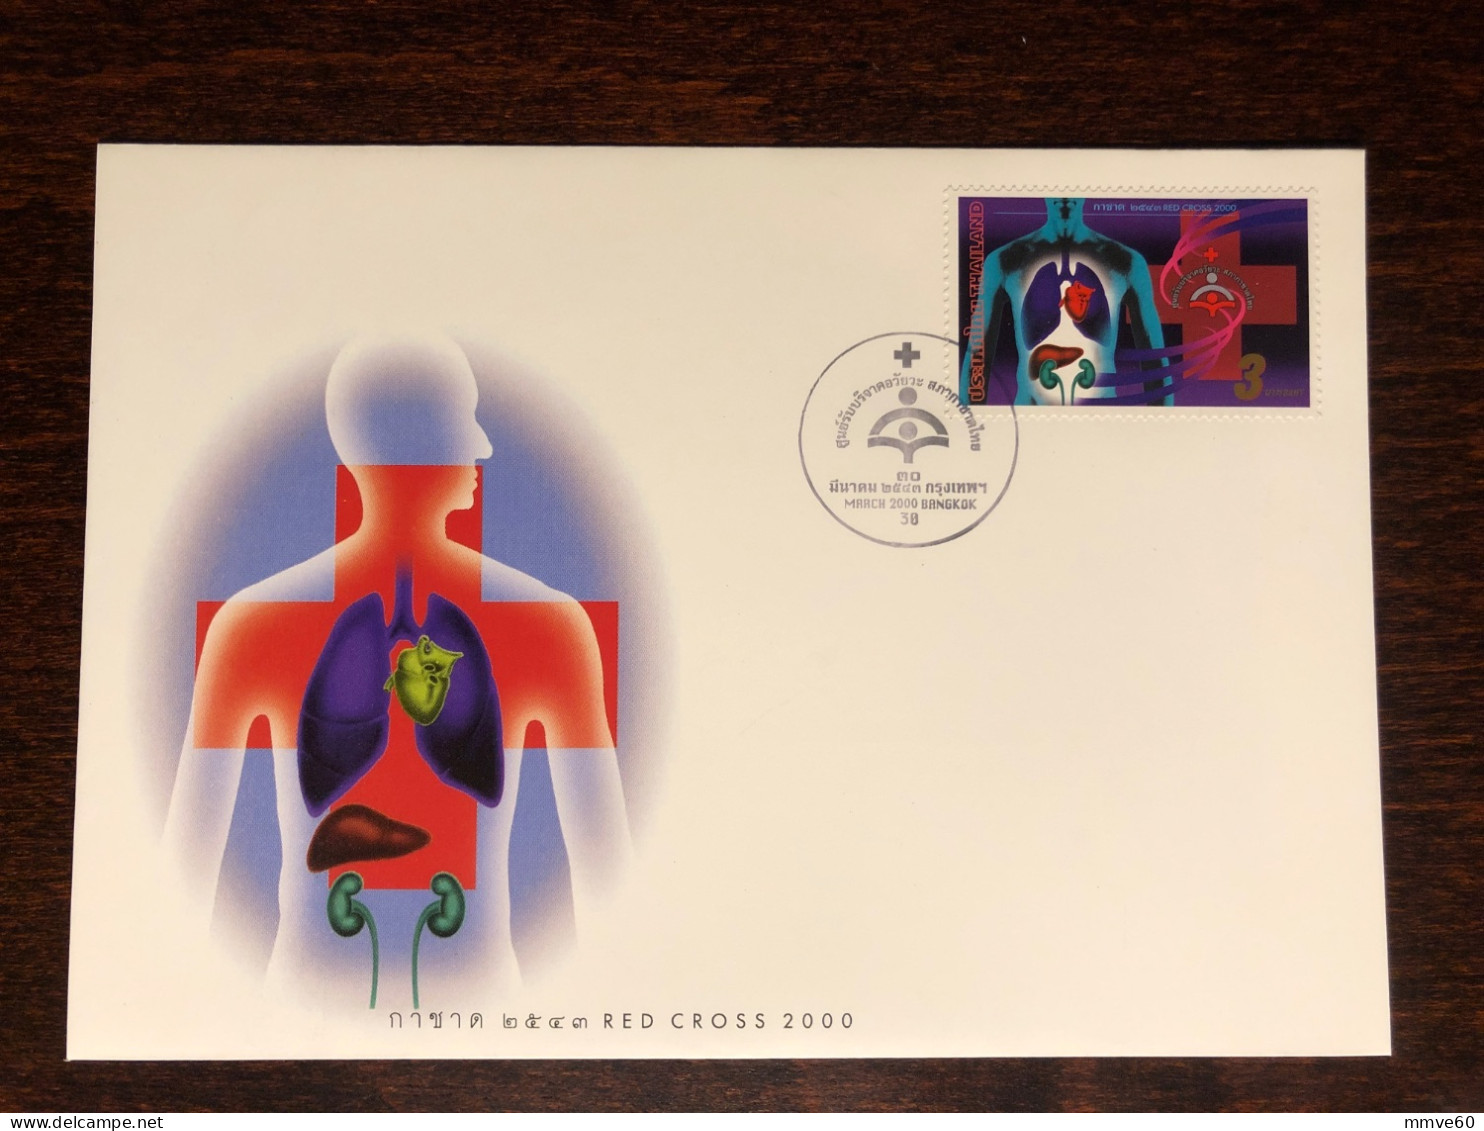 THAILAND FDC COVER 2000 YEAR ORGAN DONATION DONORS HEALTH MEDICINE STAMPS - Thailand